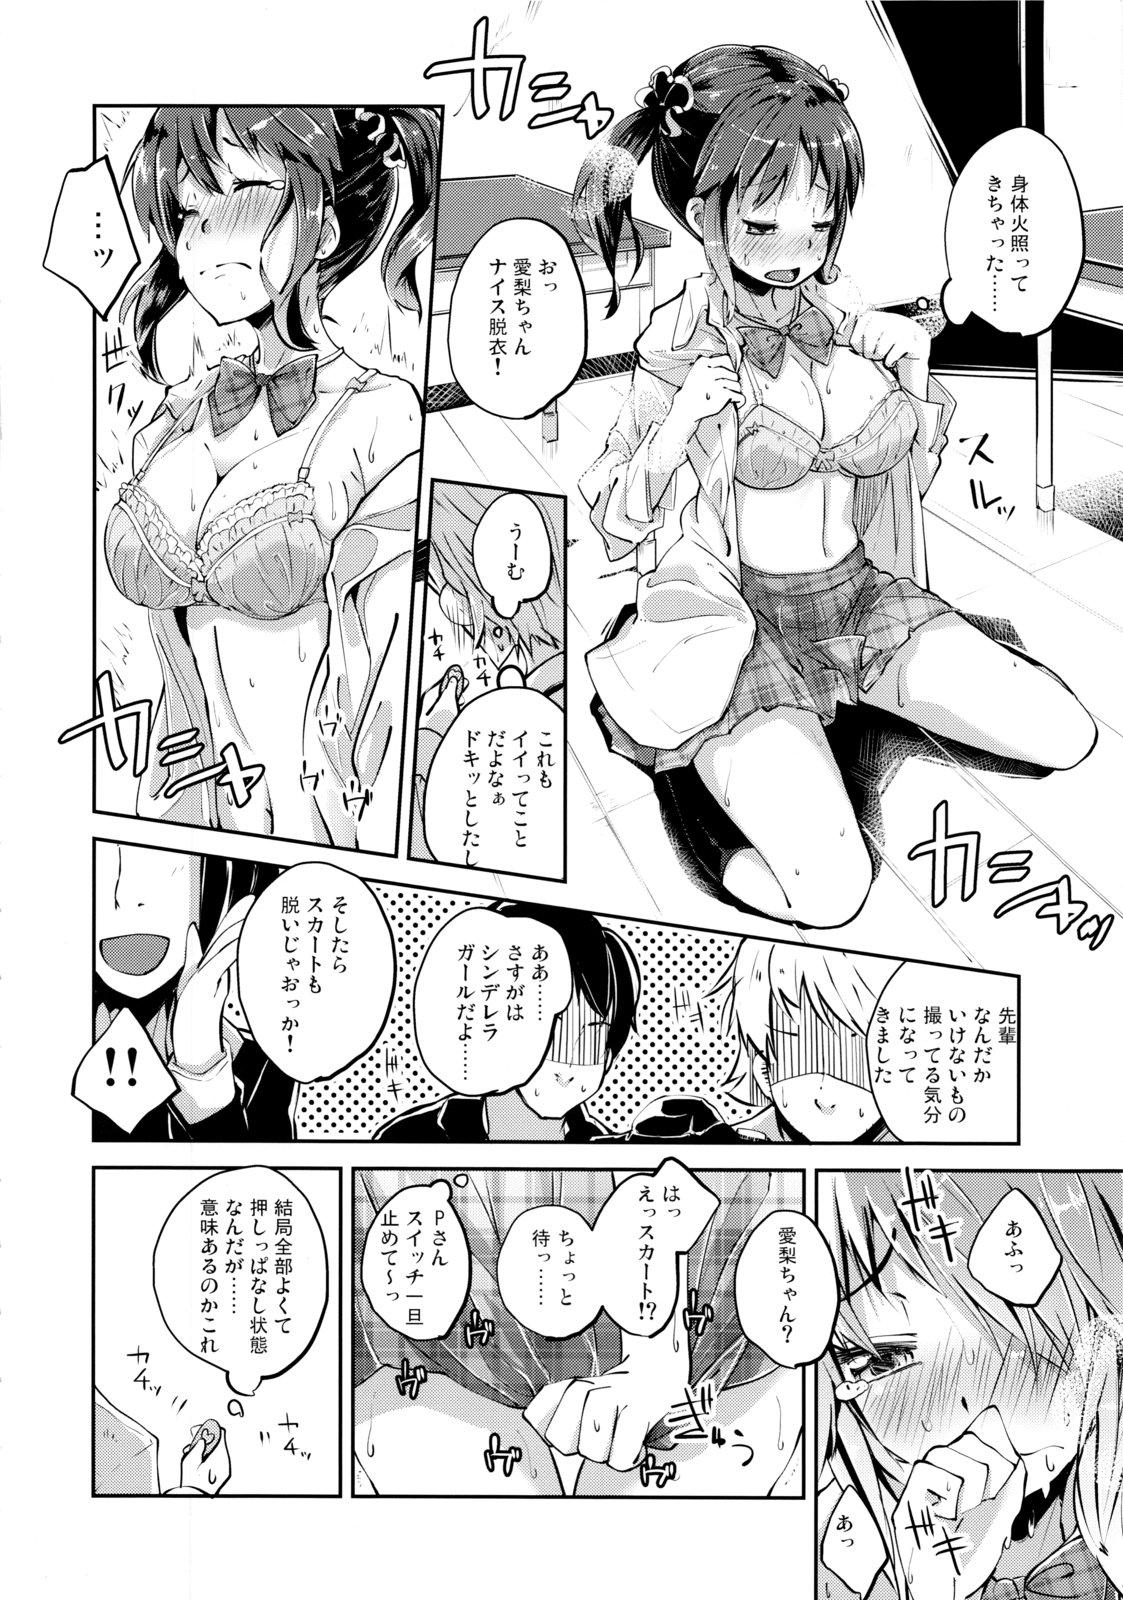 Love To To Dolce - The idolmaster Masterbation - Page 5